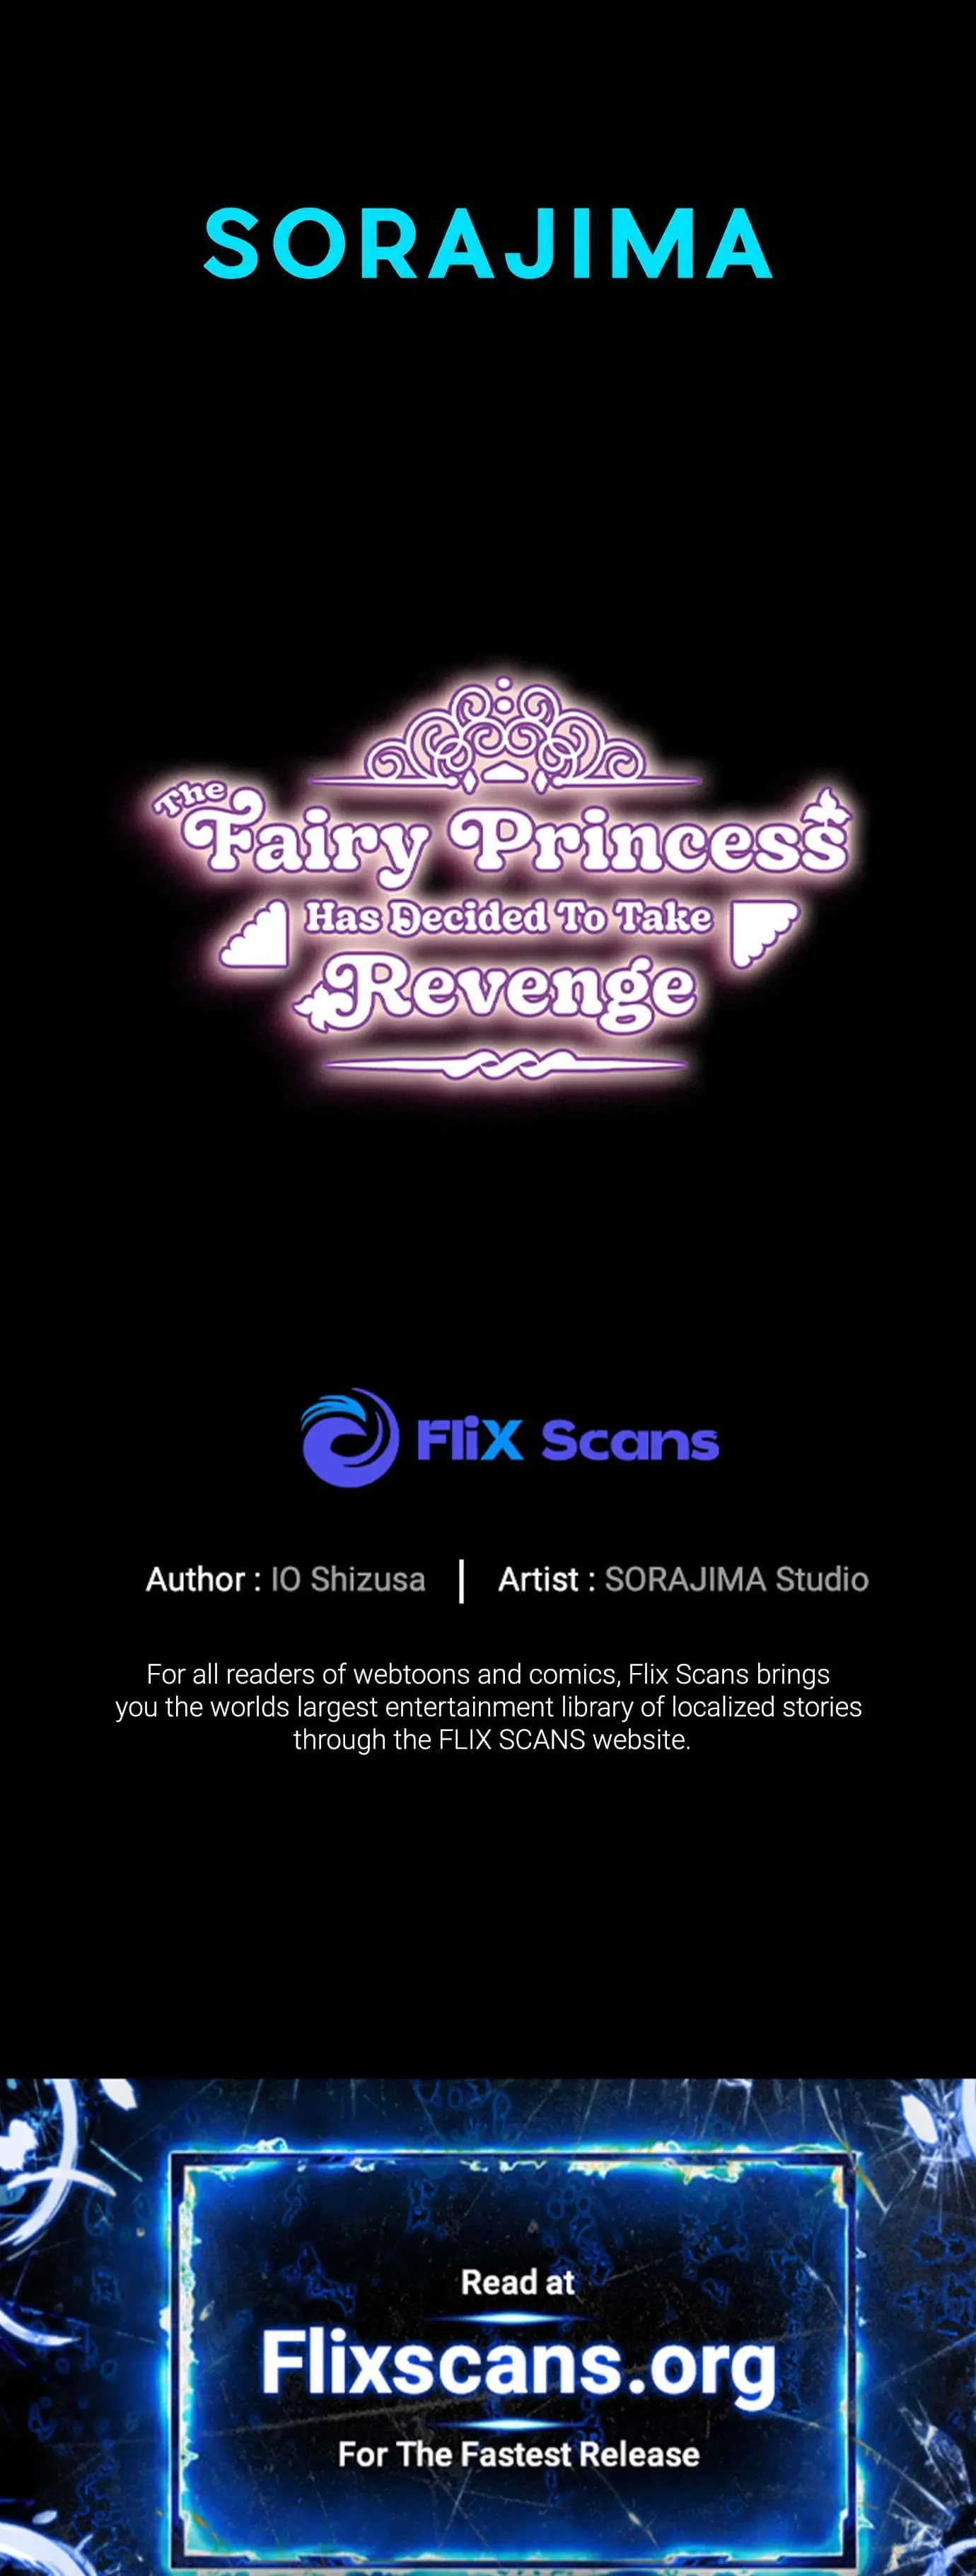 The Fairy Princess Has Decided to Take Revenge chapter 13